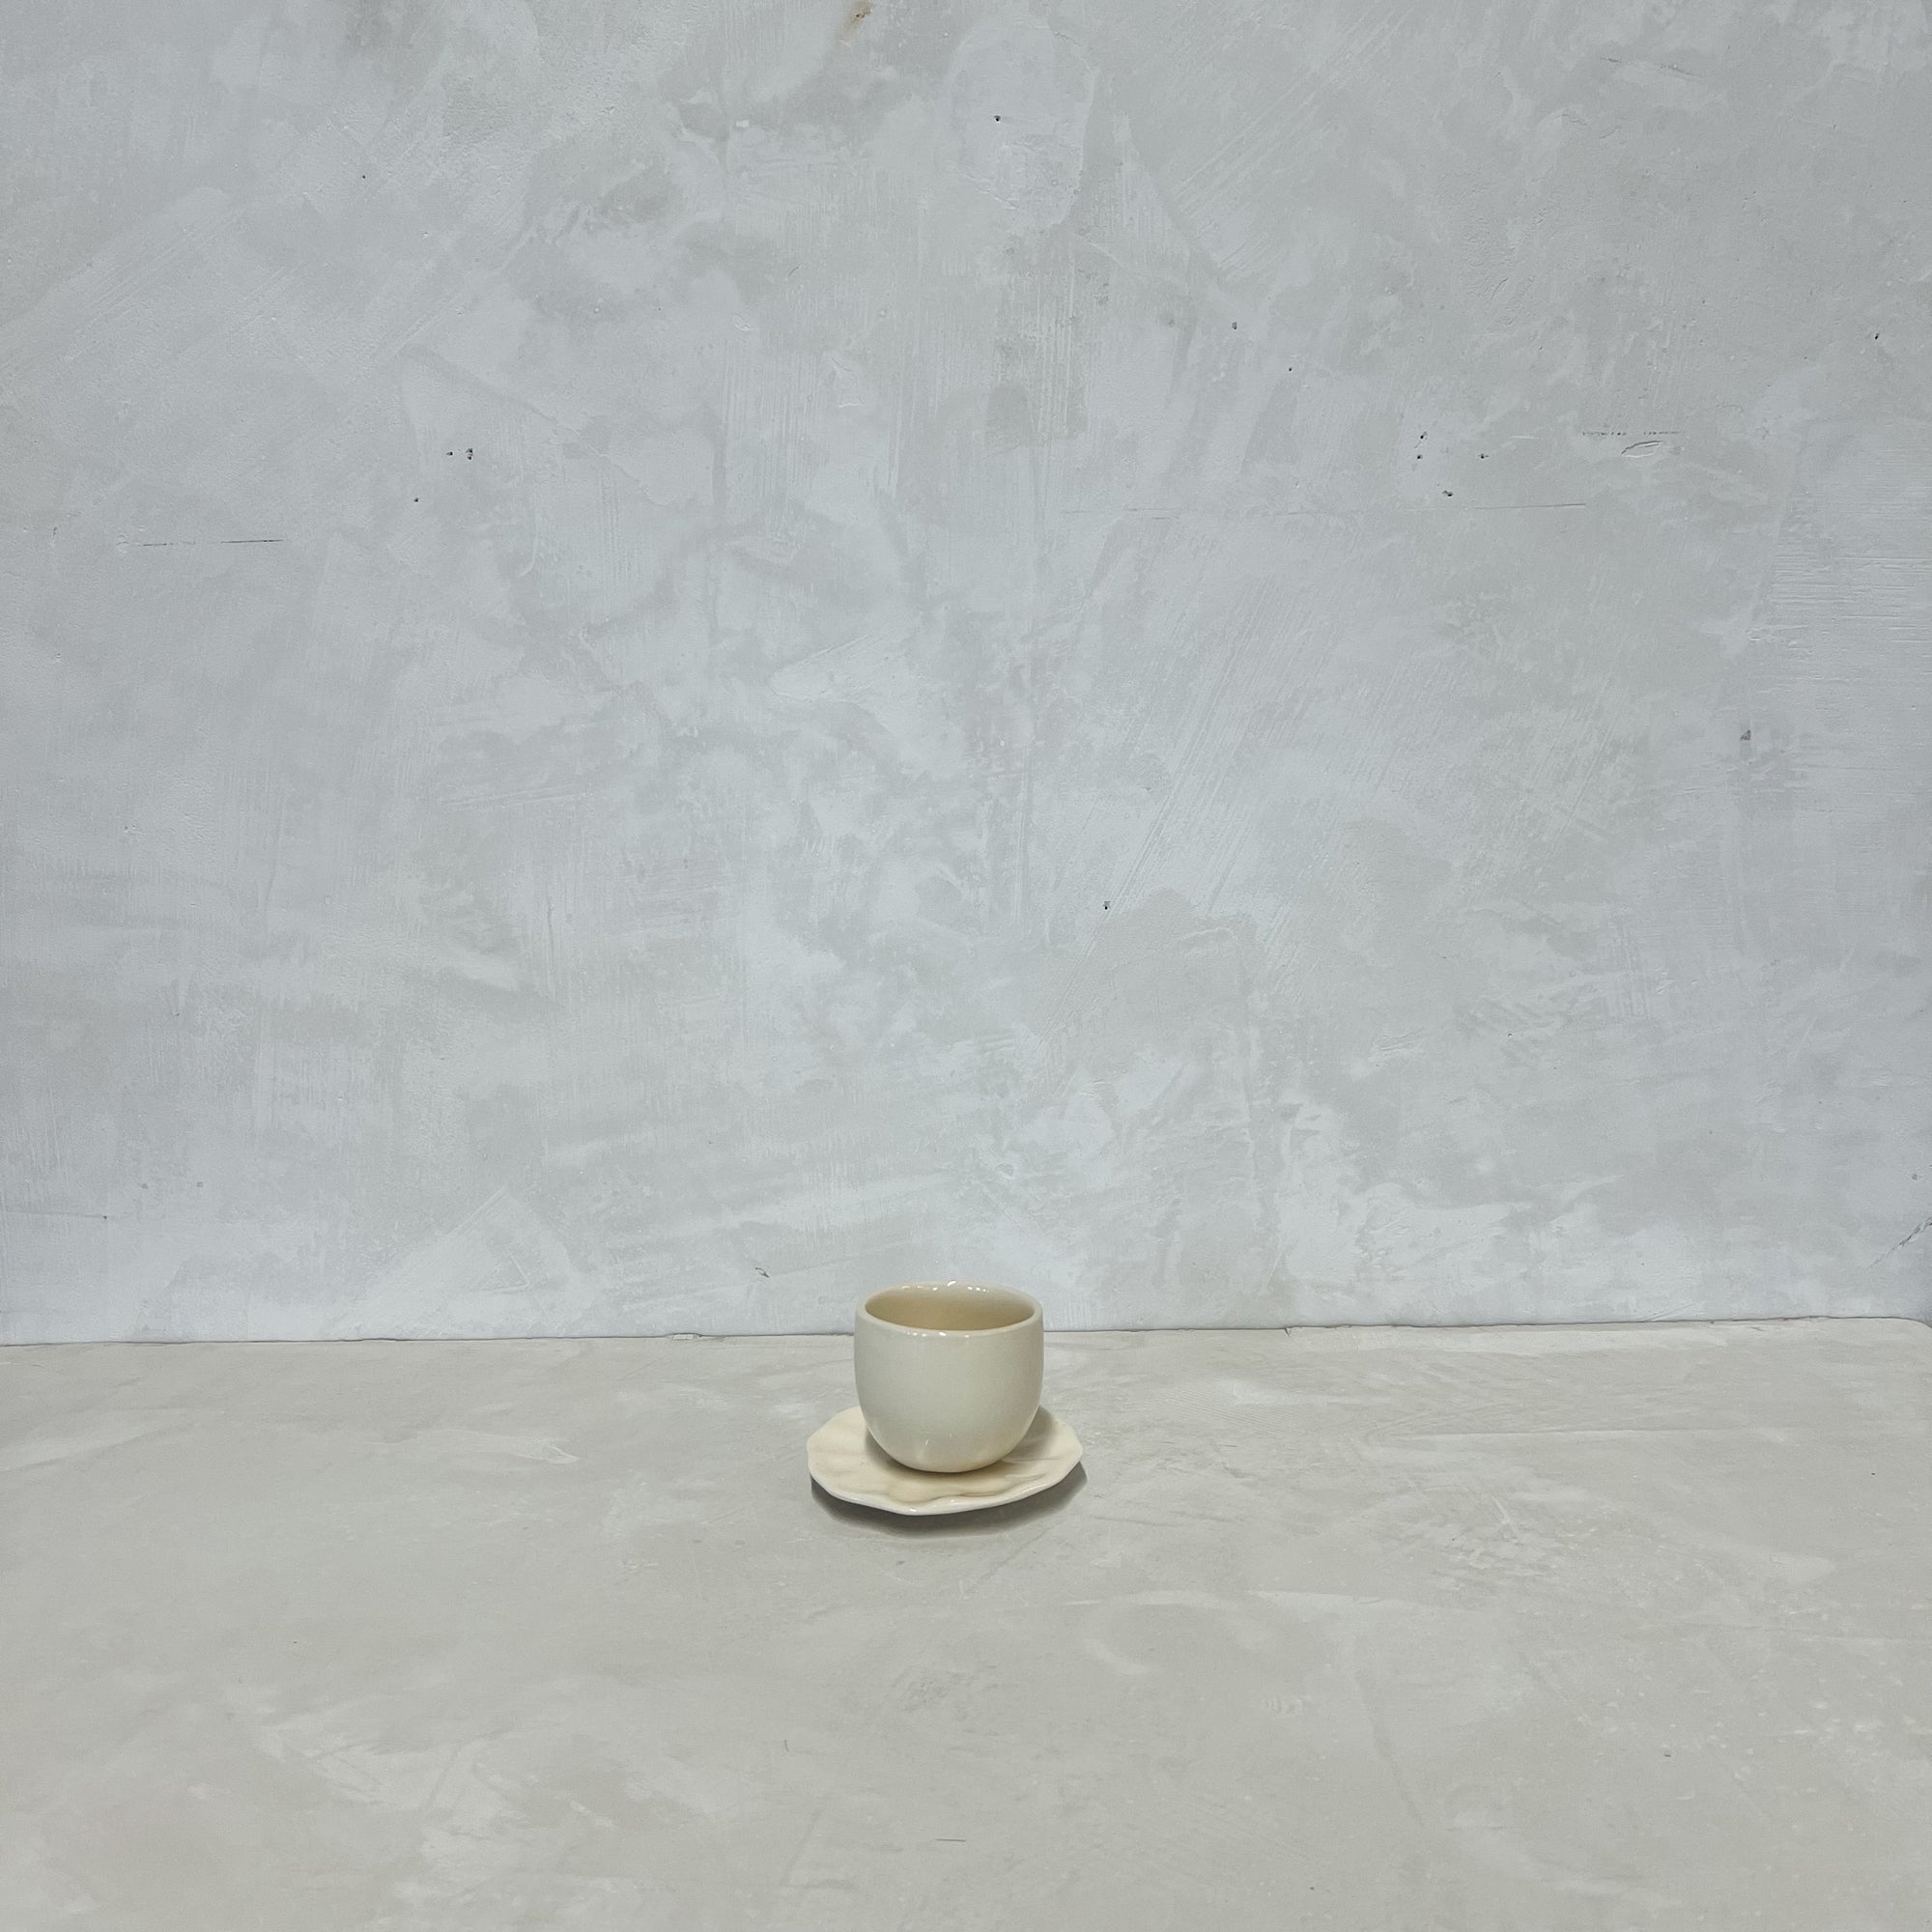 Gloss White Espresso Cup with Saucer Second